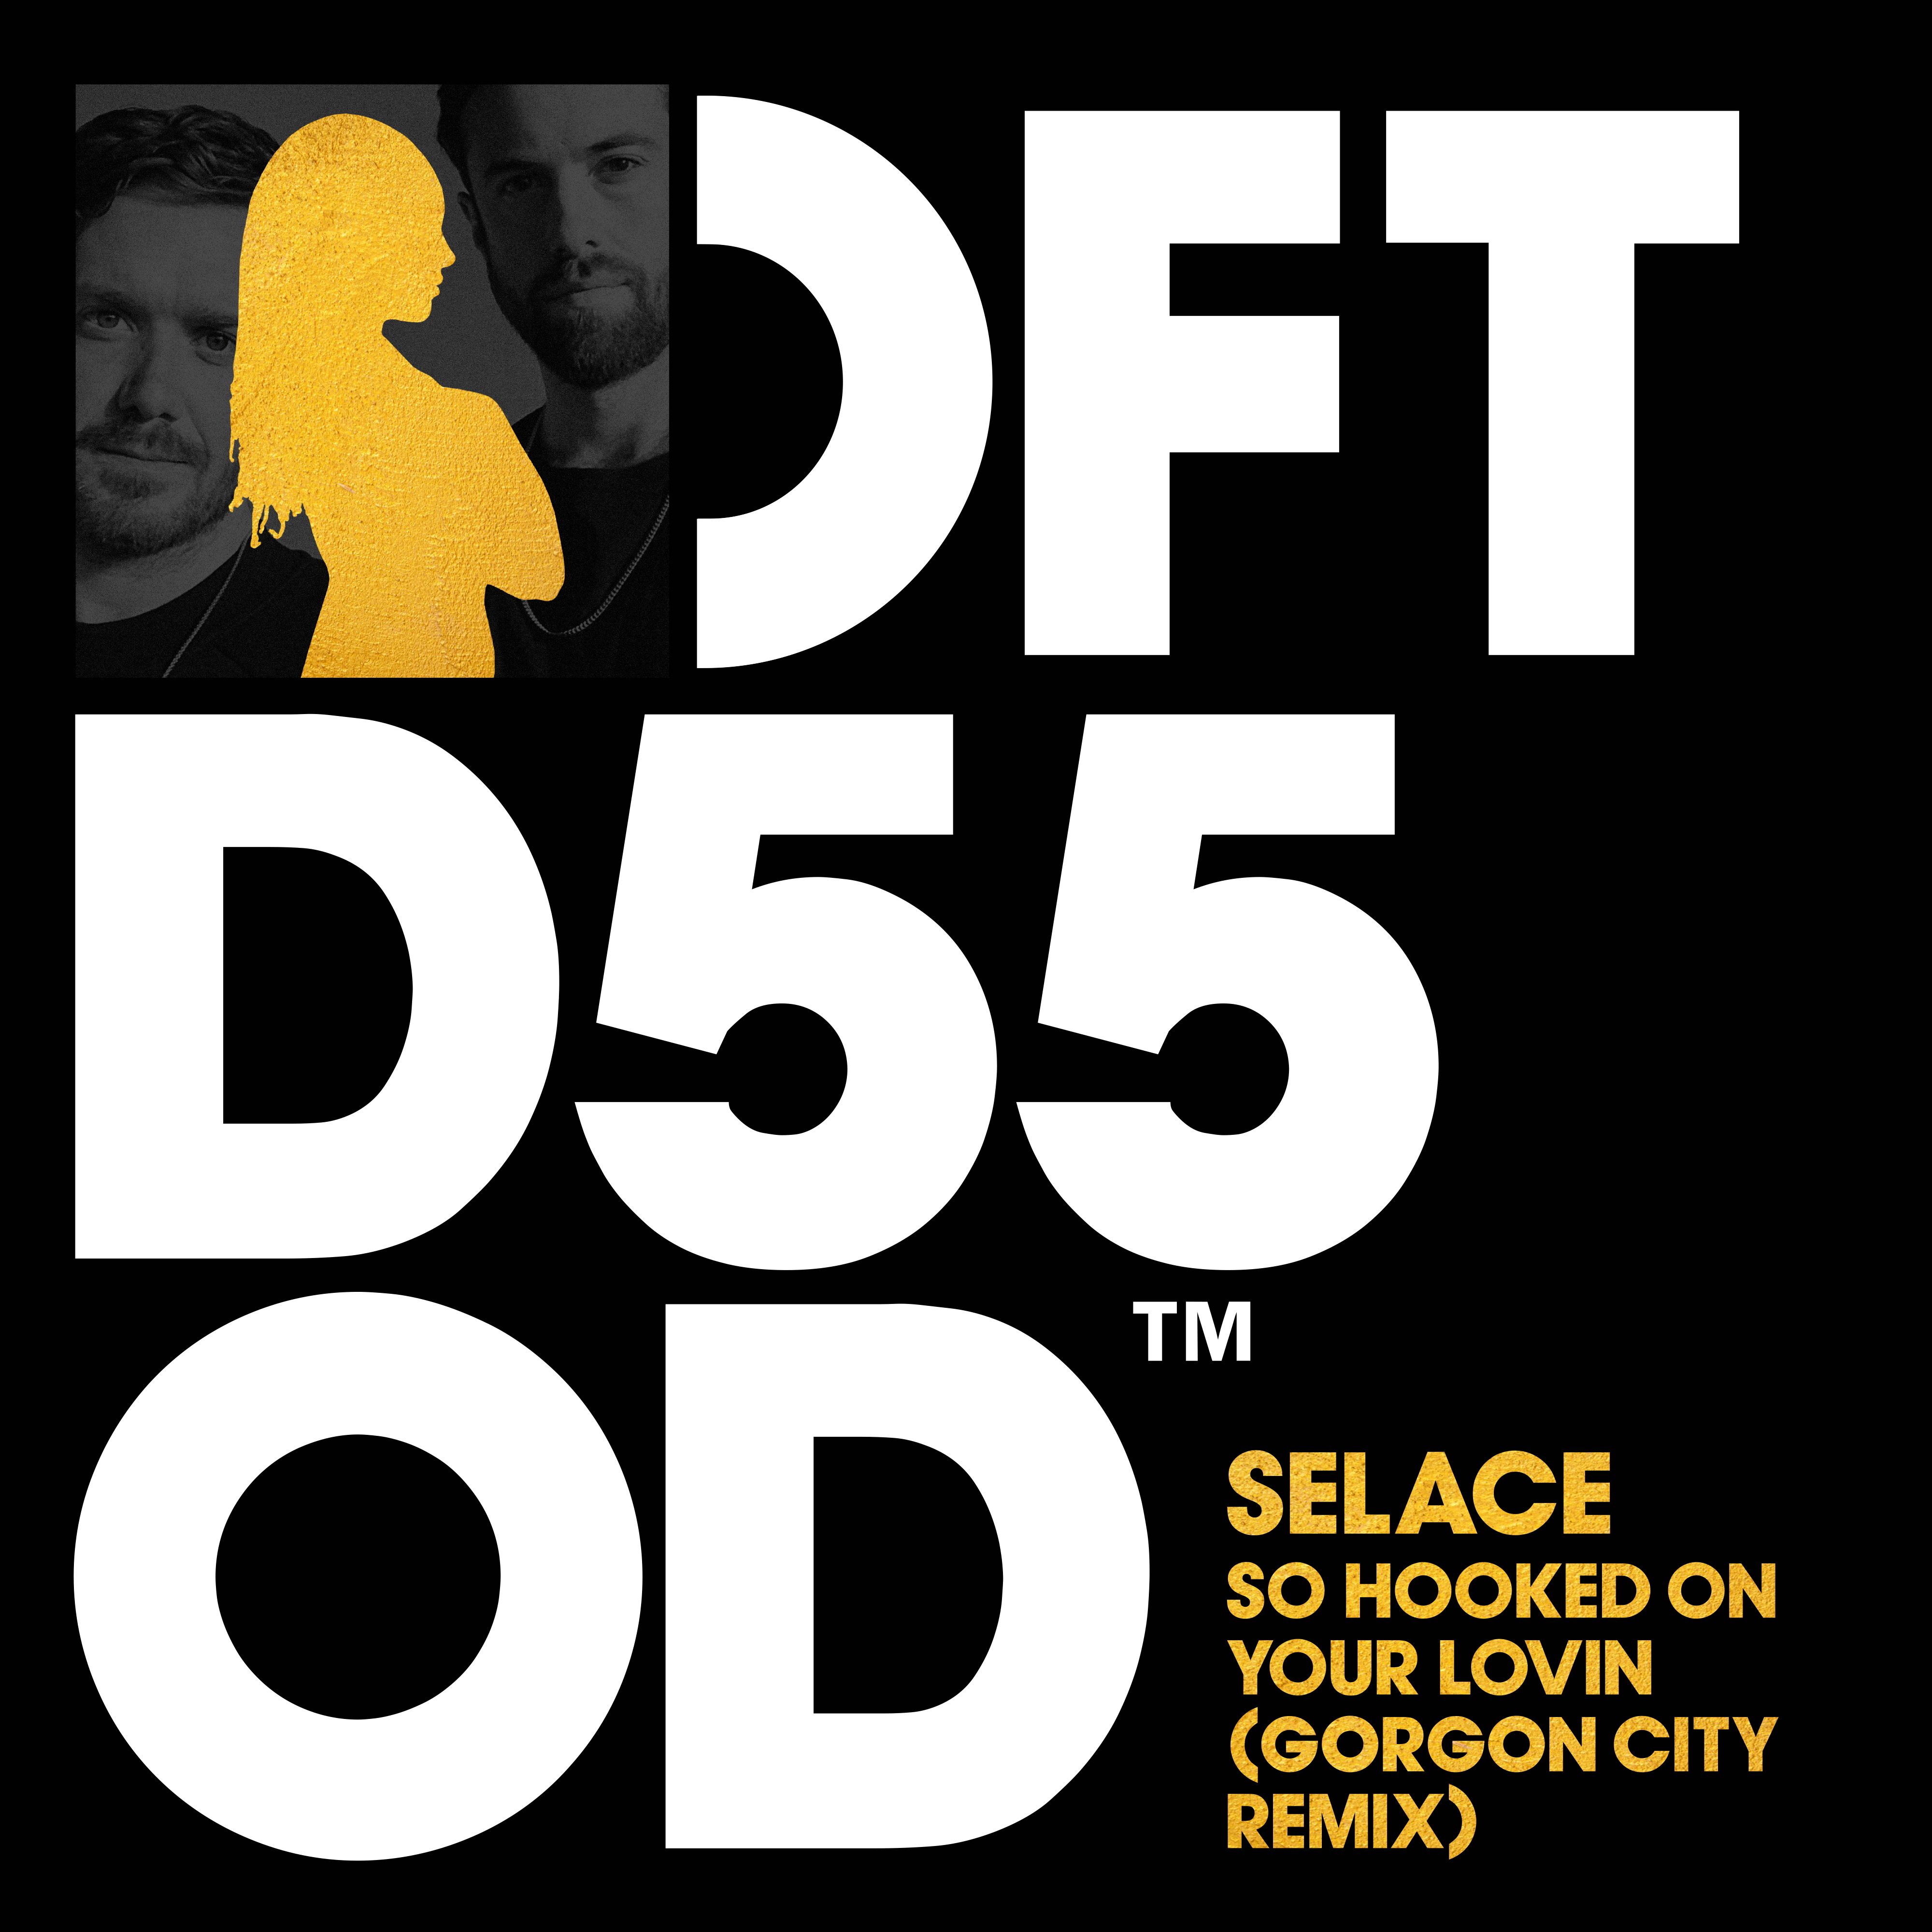 Selace 'So Hooked On Your Lovin' (Gorgon City Remix)